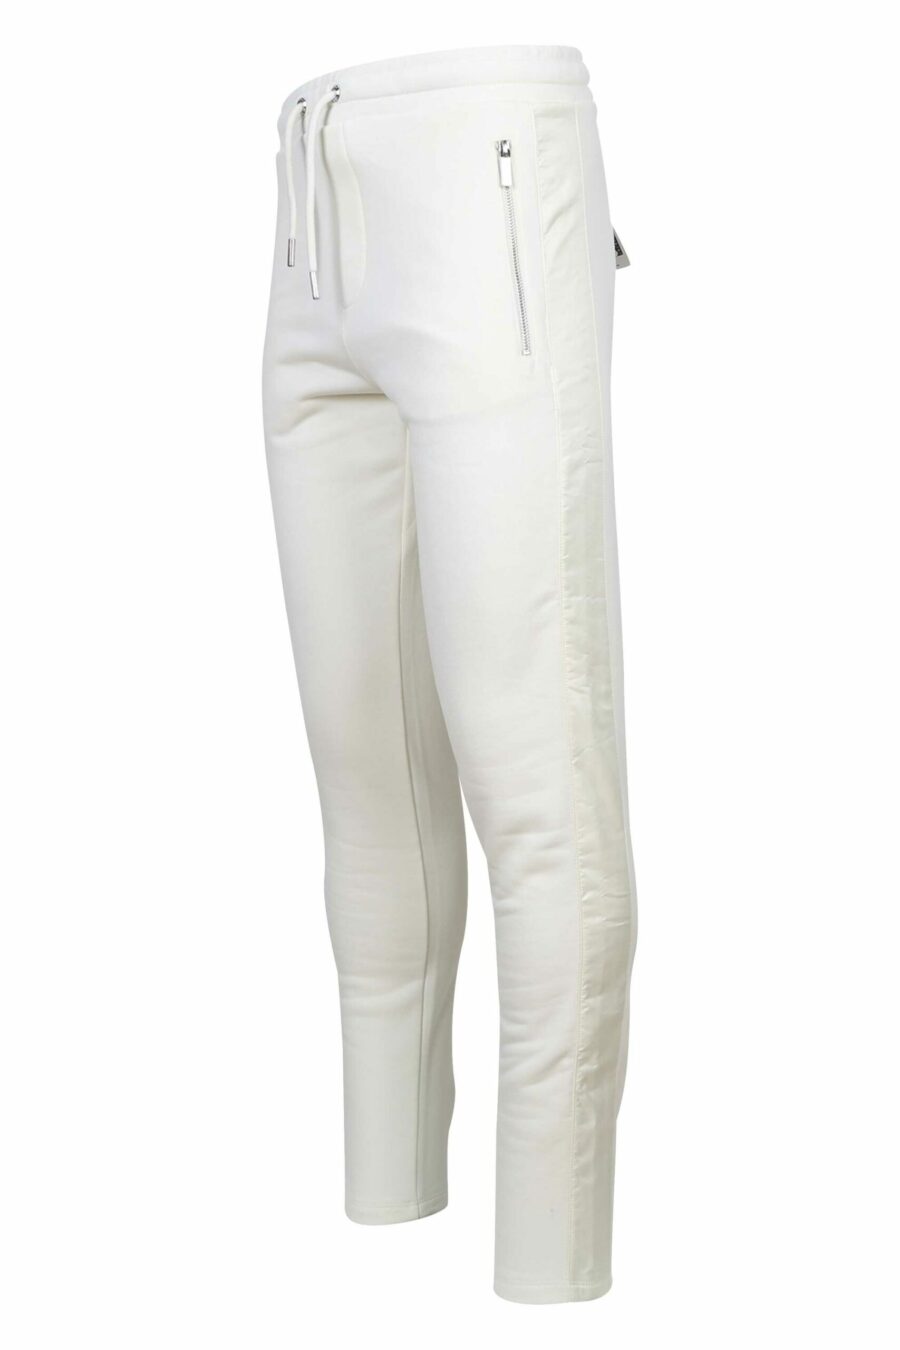 Tracksuit bottoms beige - 4062226650526 1 1 scaled